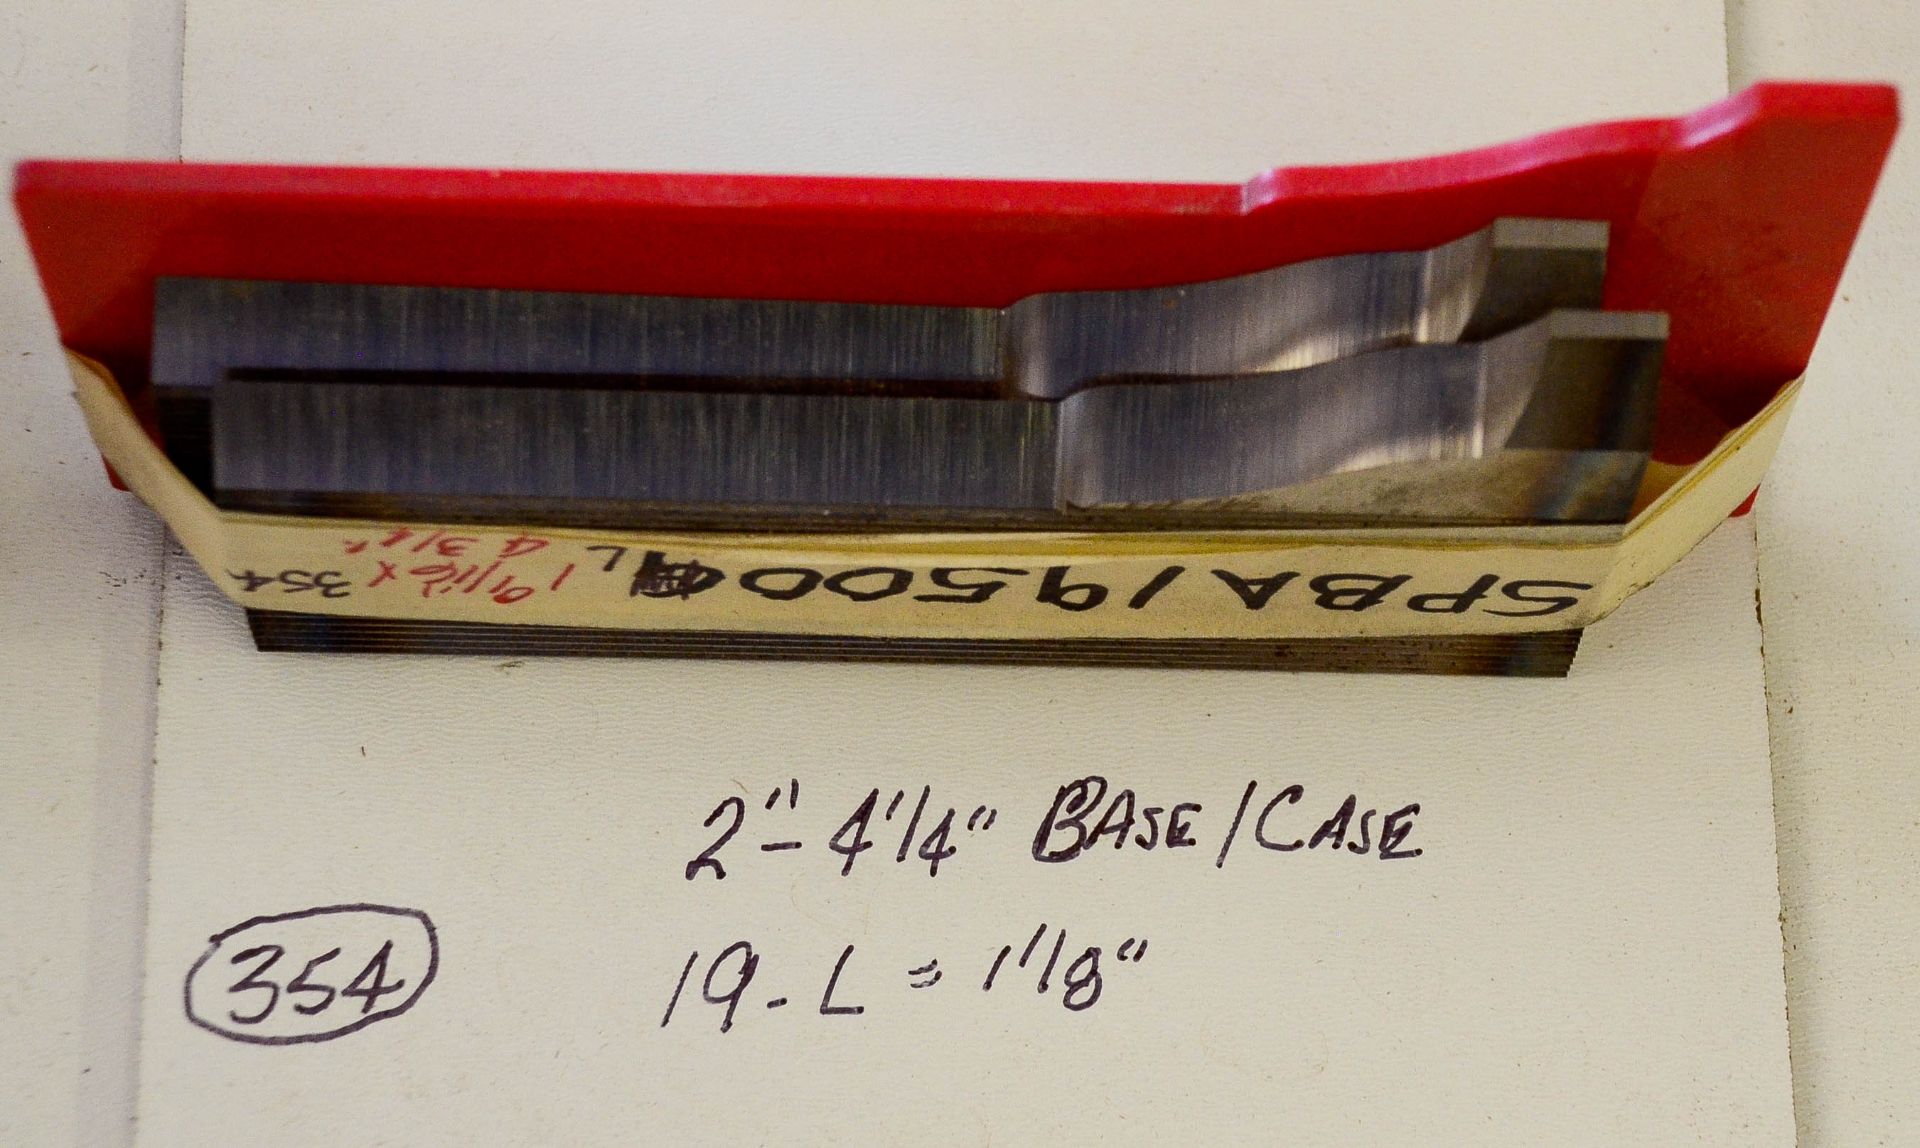 Moulding Knives, 2"- 4-1/4" Base/Case, 19 - L = 1-1/8", Knives are in Good Condition and Ready to - Image 2 of 2